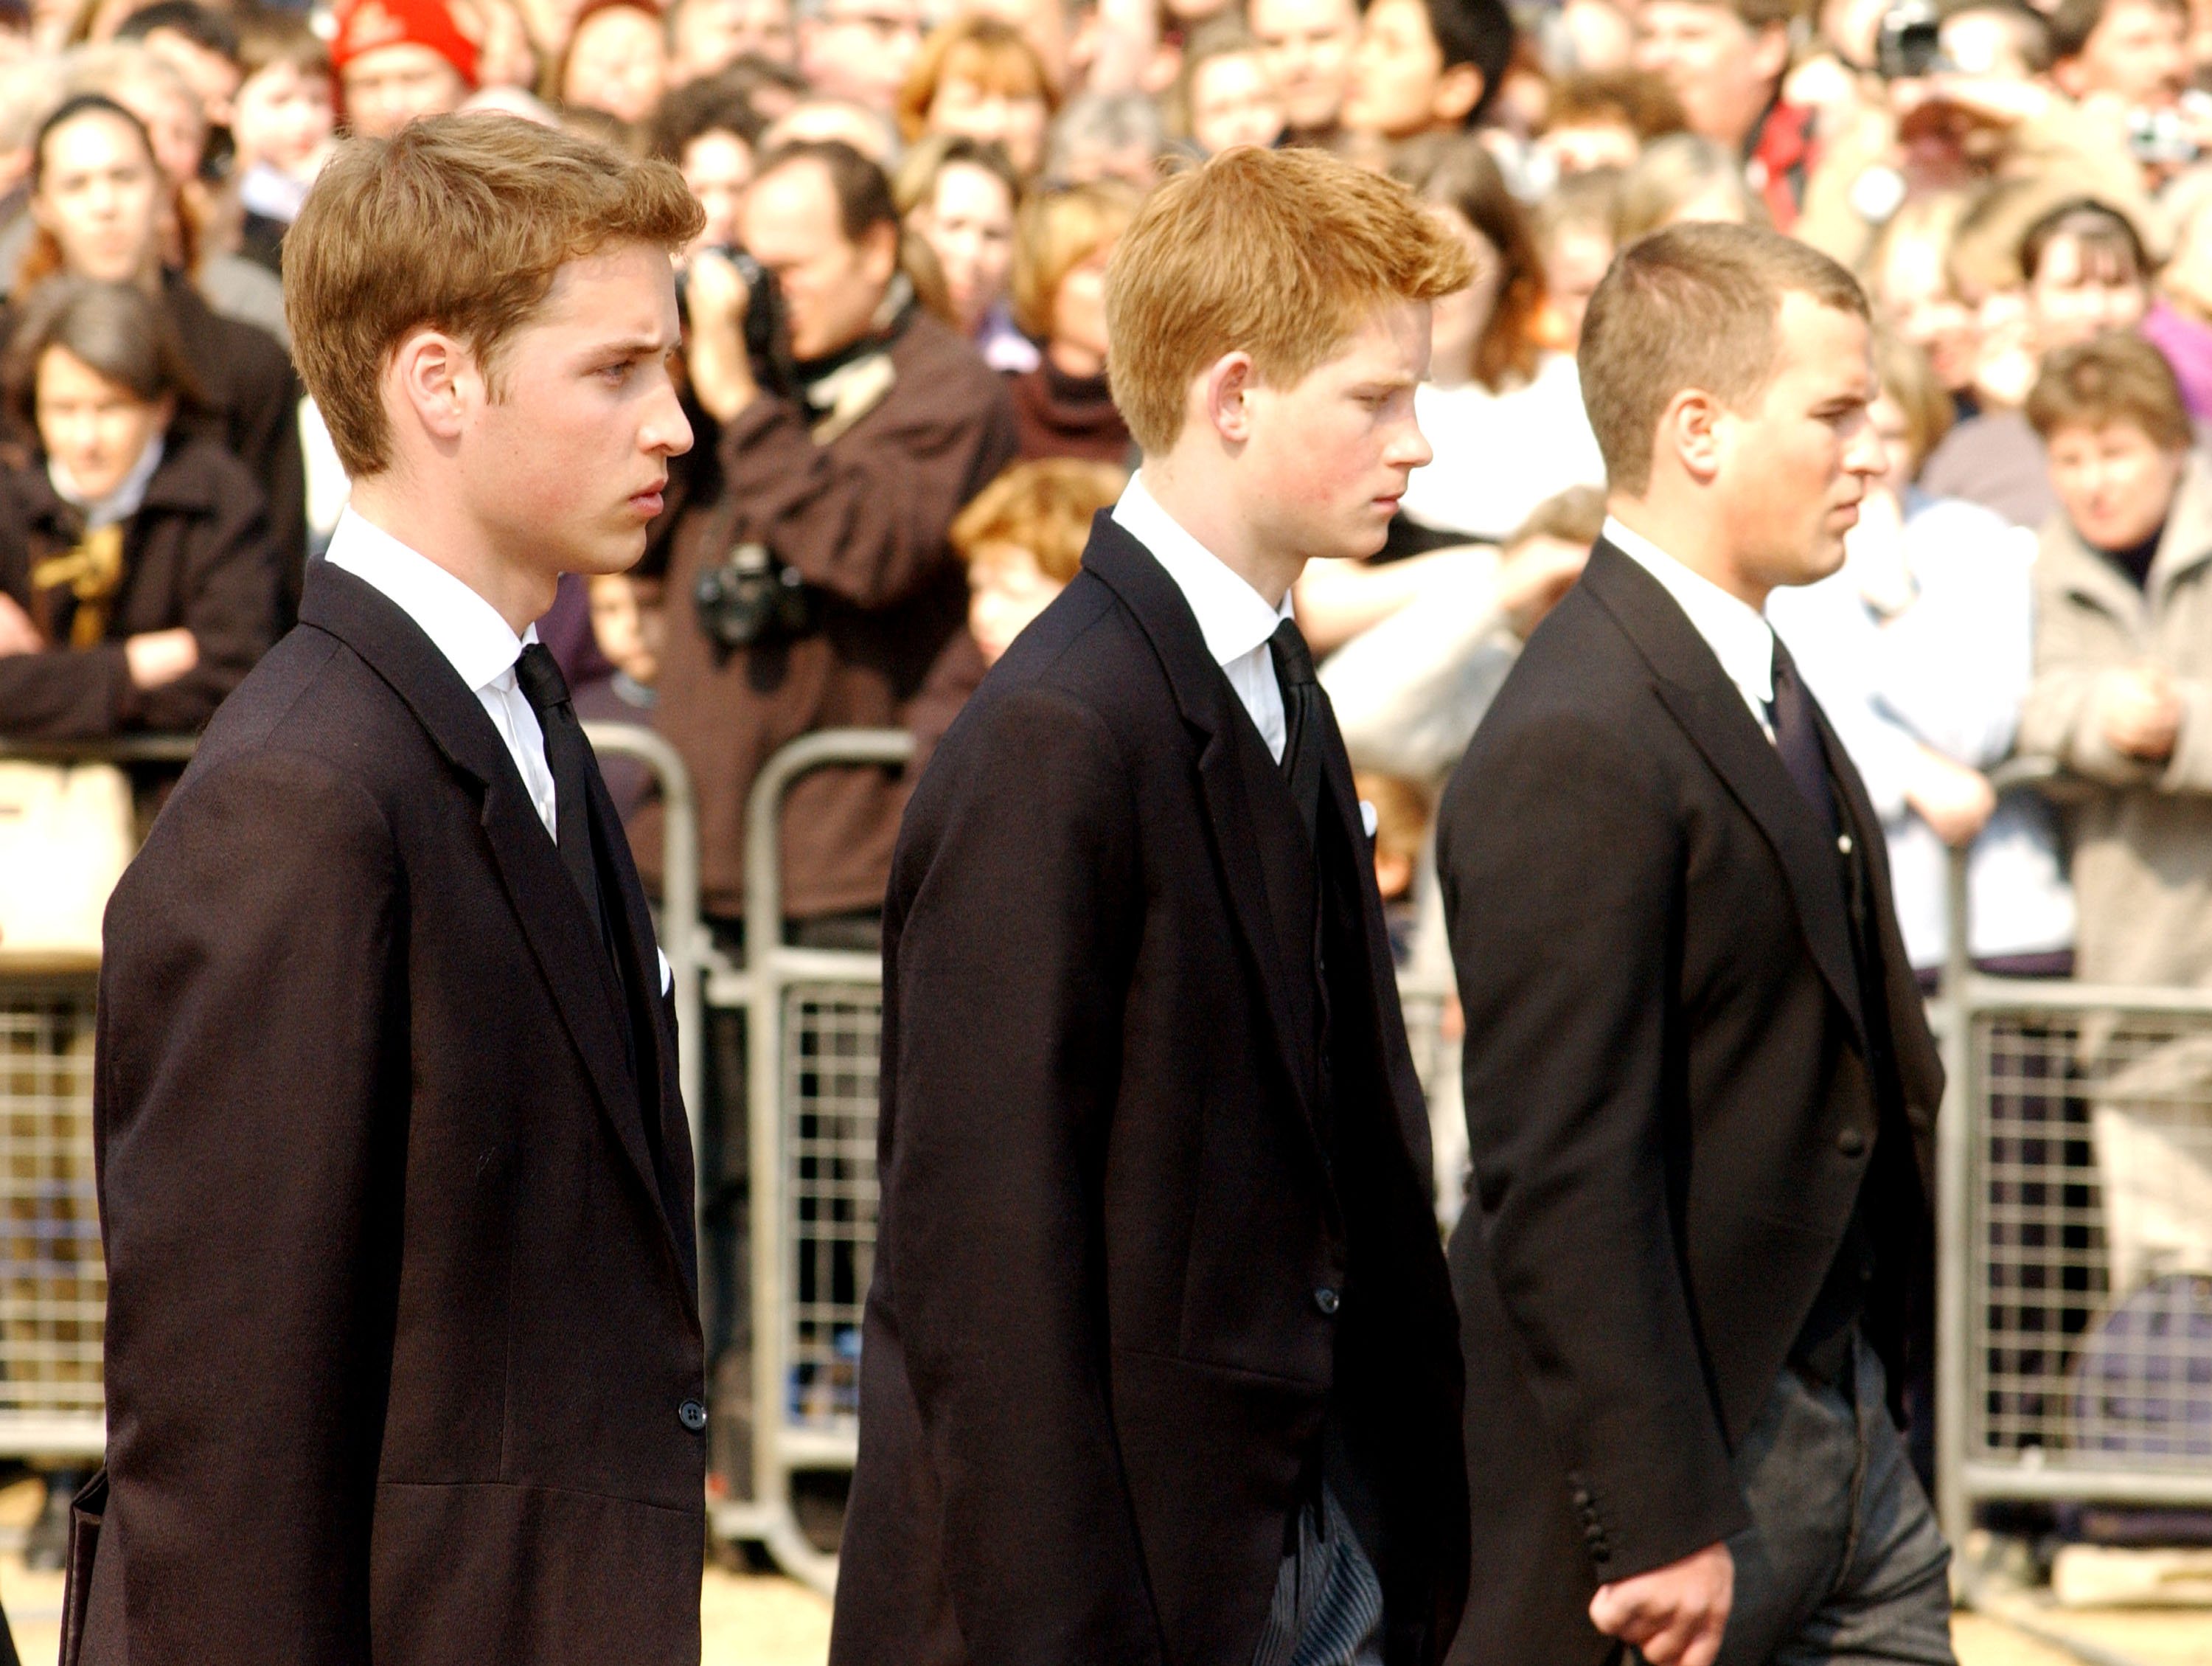 Prince William, Prince Harry, and Peter Phillips walk behind the coffin bearing the Queen Mother April 5, 2002 as her ceremonial procession makes its way down the Mall in London | Source: Getty Images